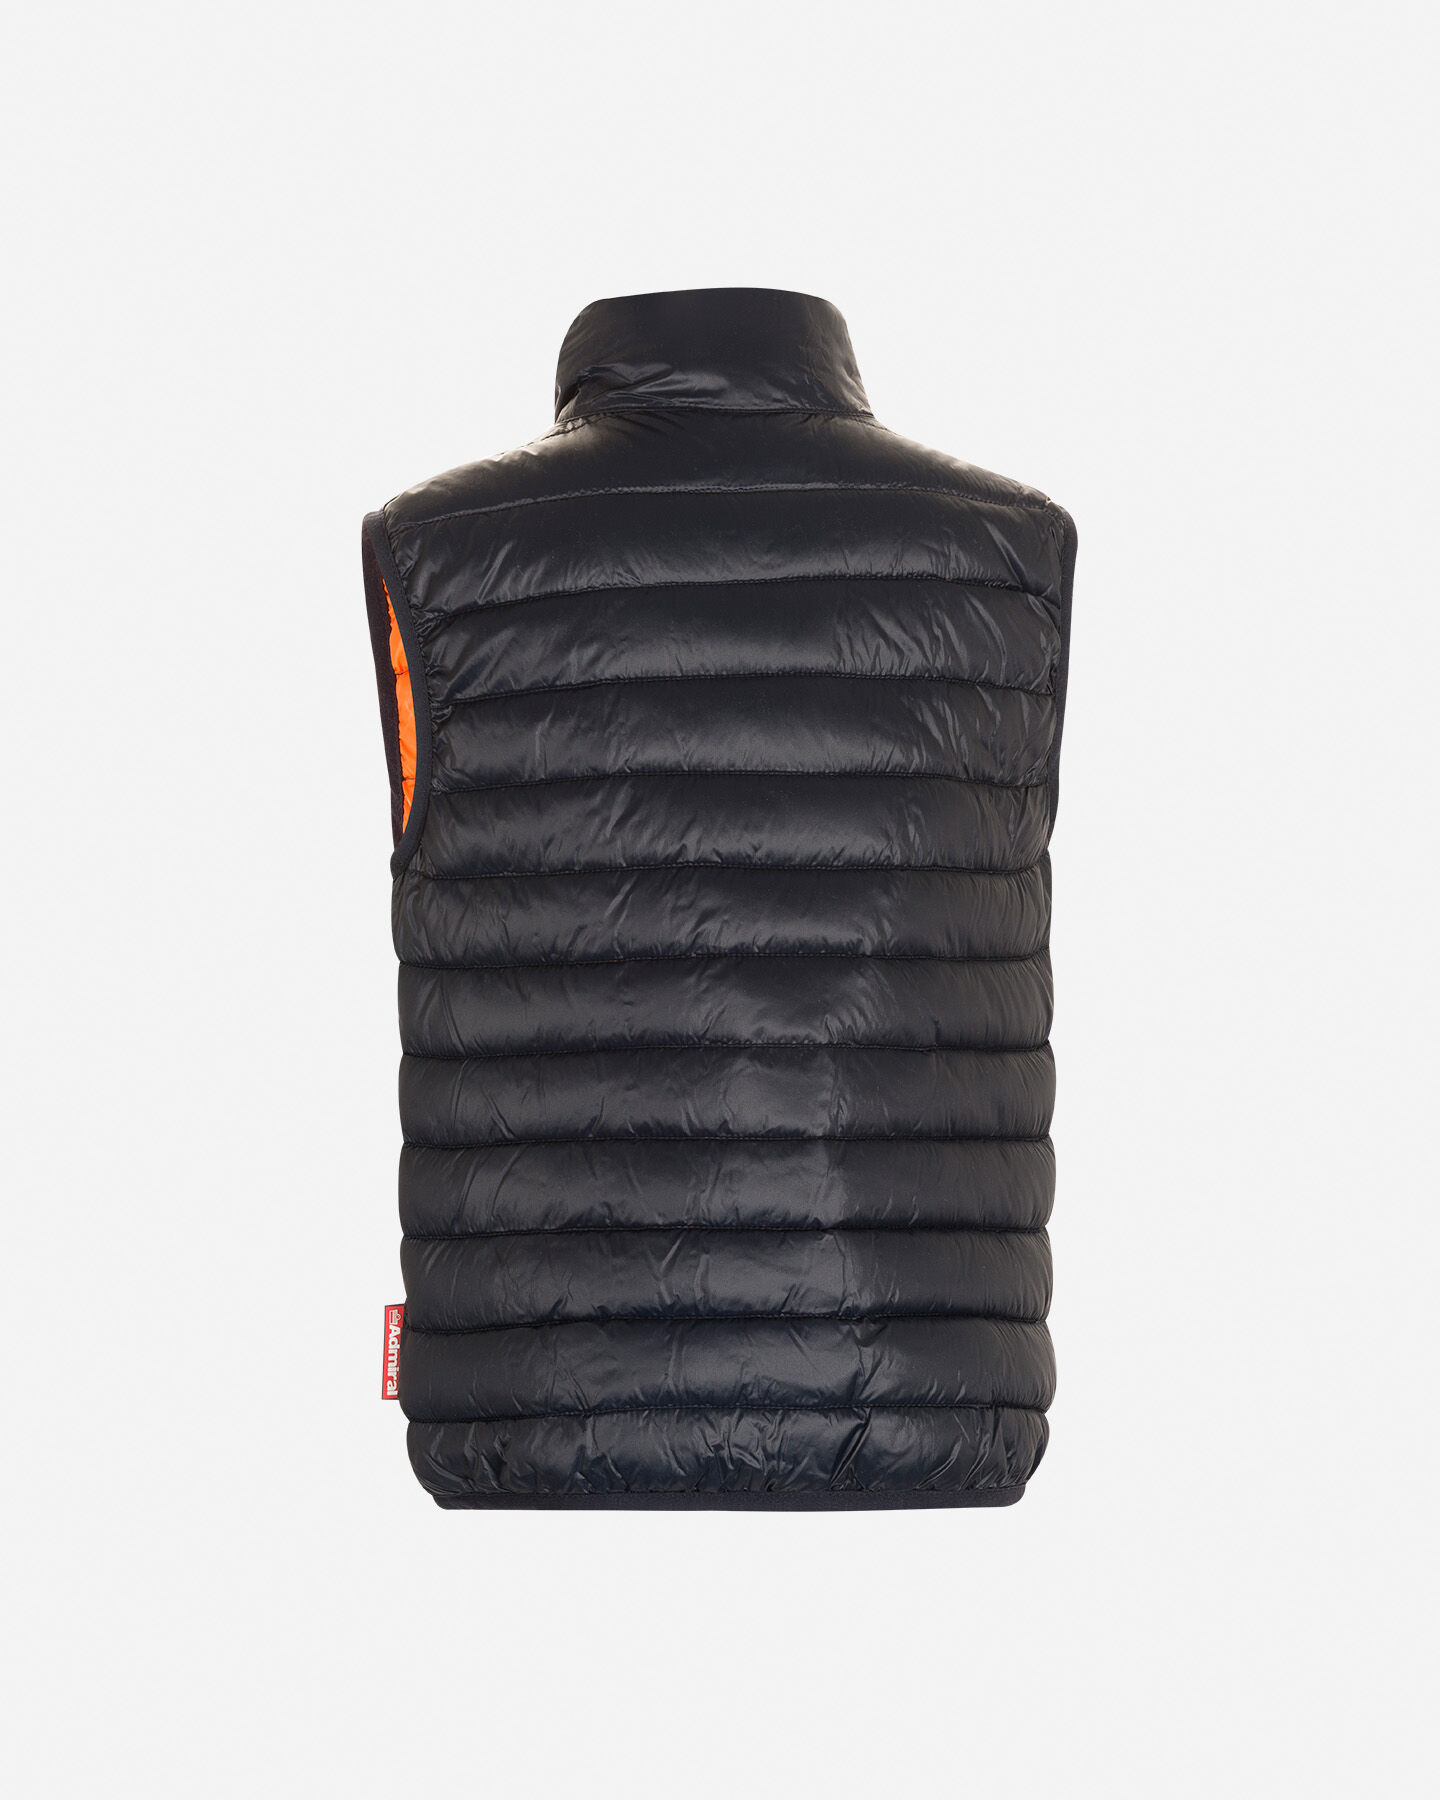  Gilet ADMIRAL LIFESTYLE JR S4101326|914|4A scatto 1